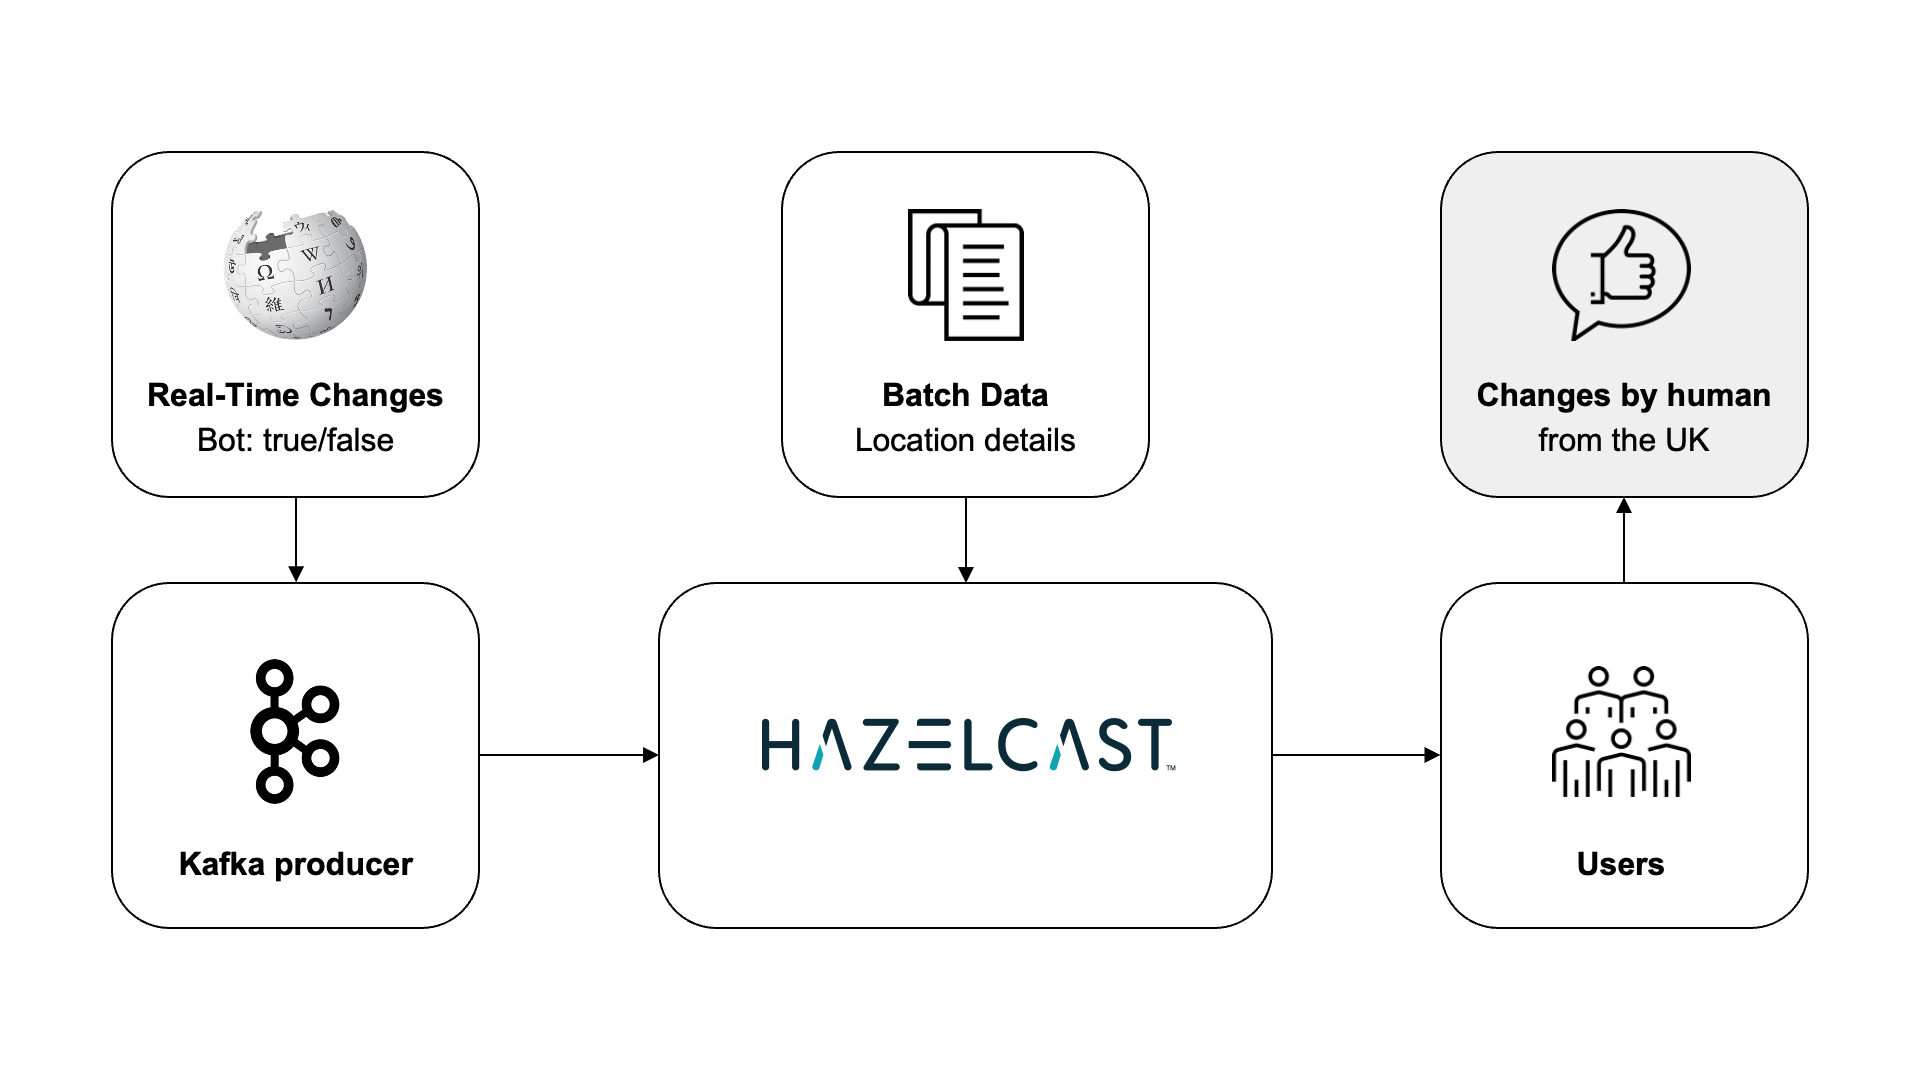 A diagram showing how to use Apache Kafka with Hazelcast for real-time stream processing.